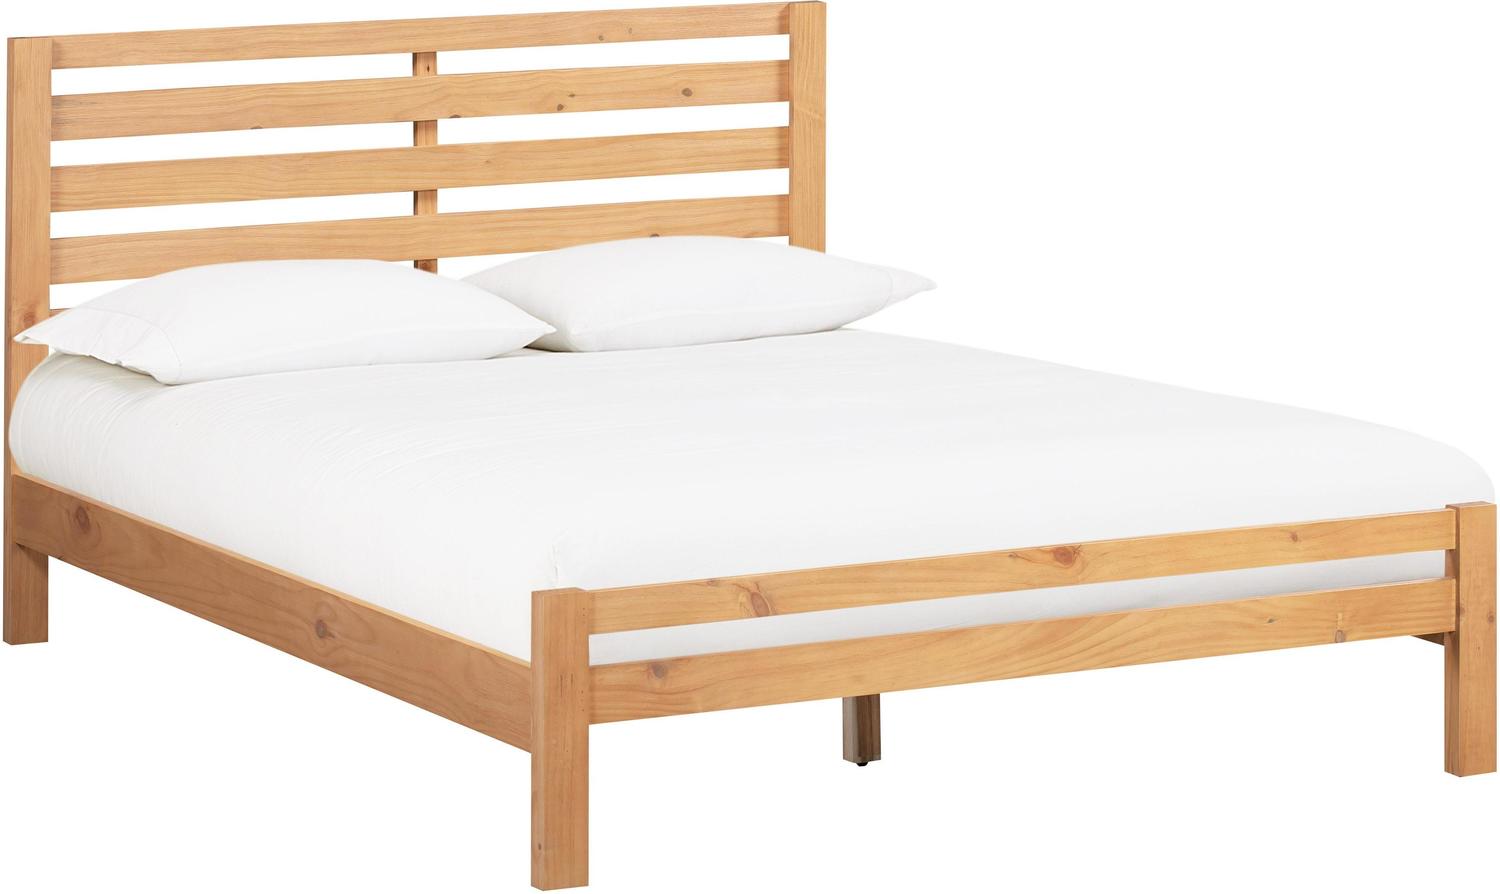 twin bed cost Contemporary Design Furniture Beds Oak